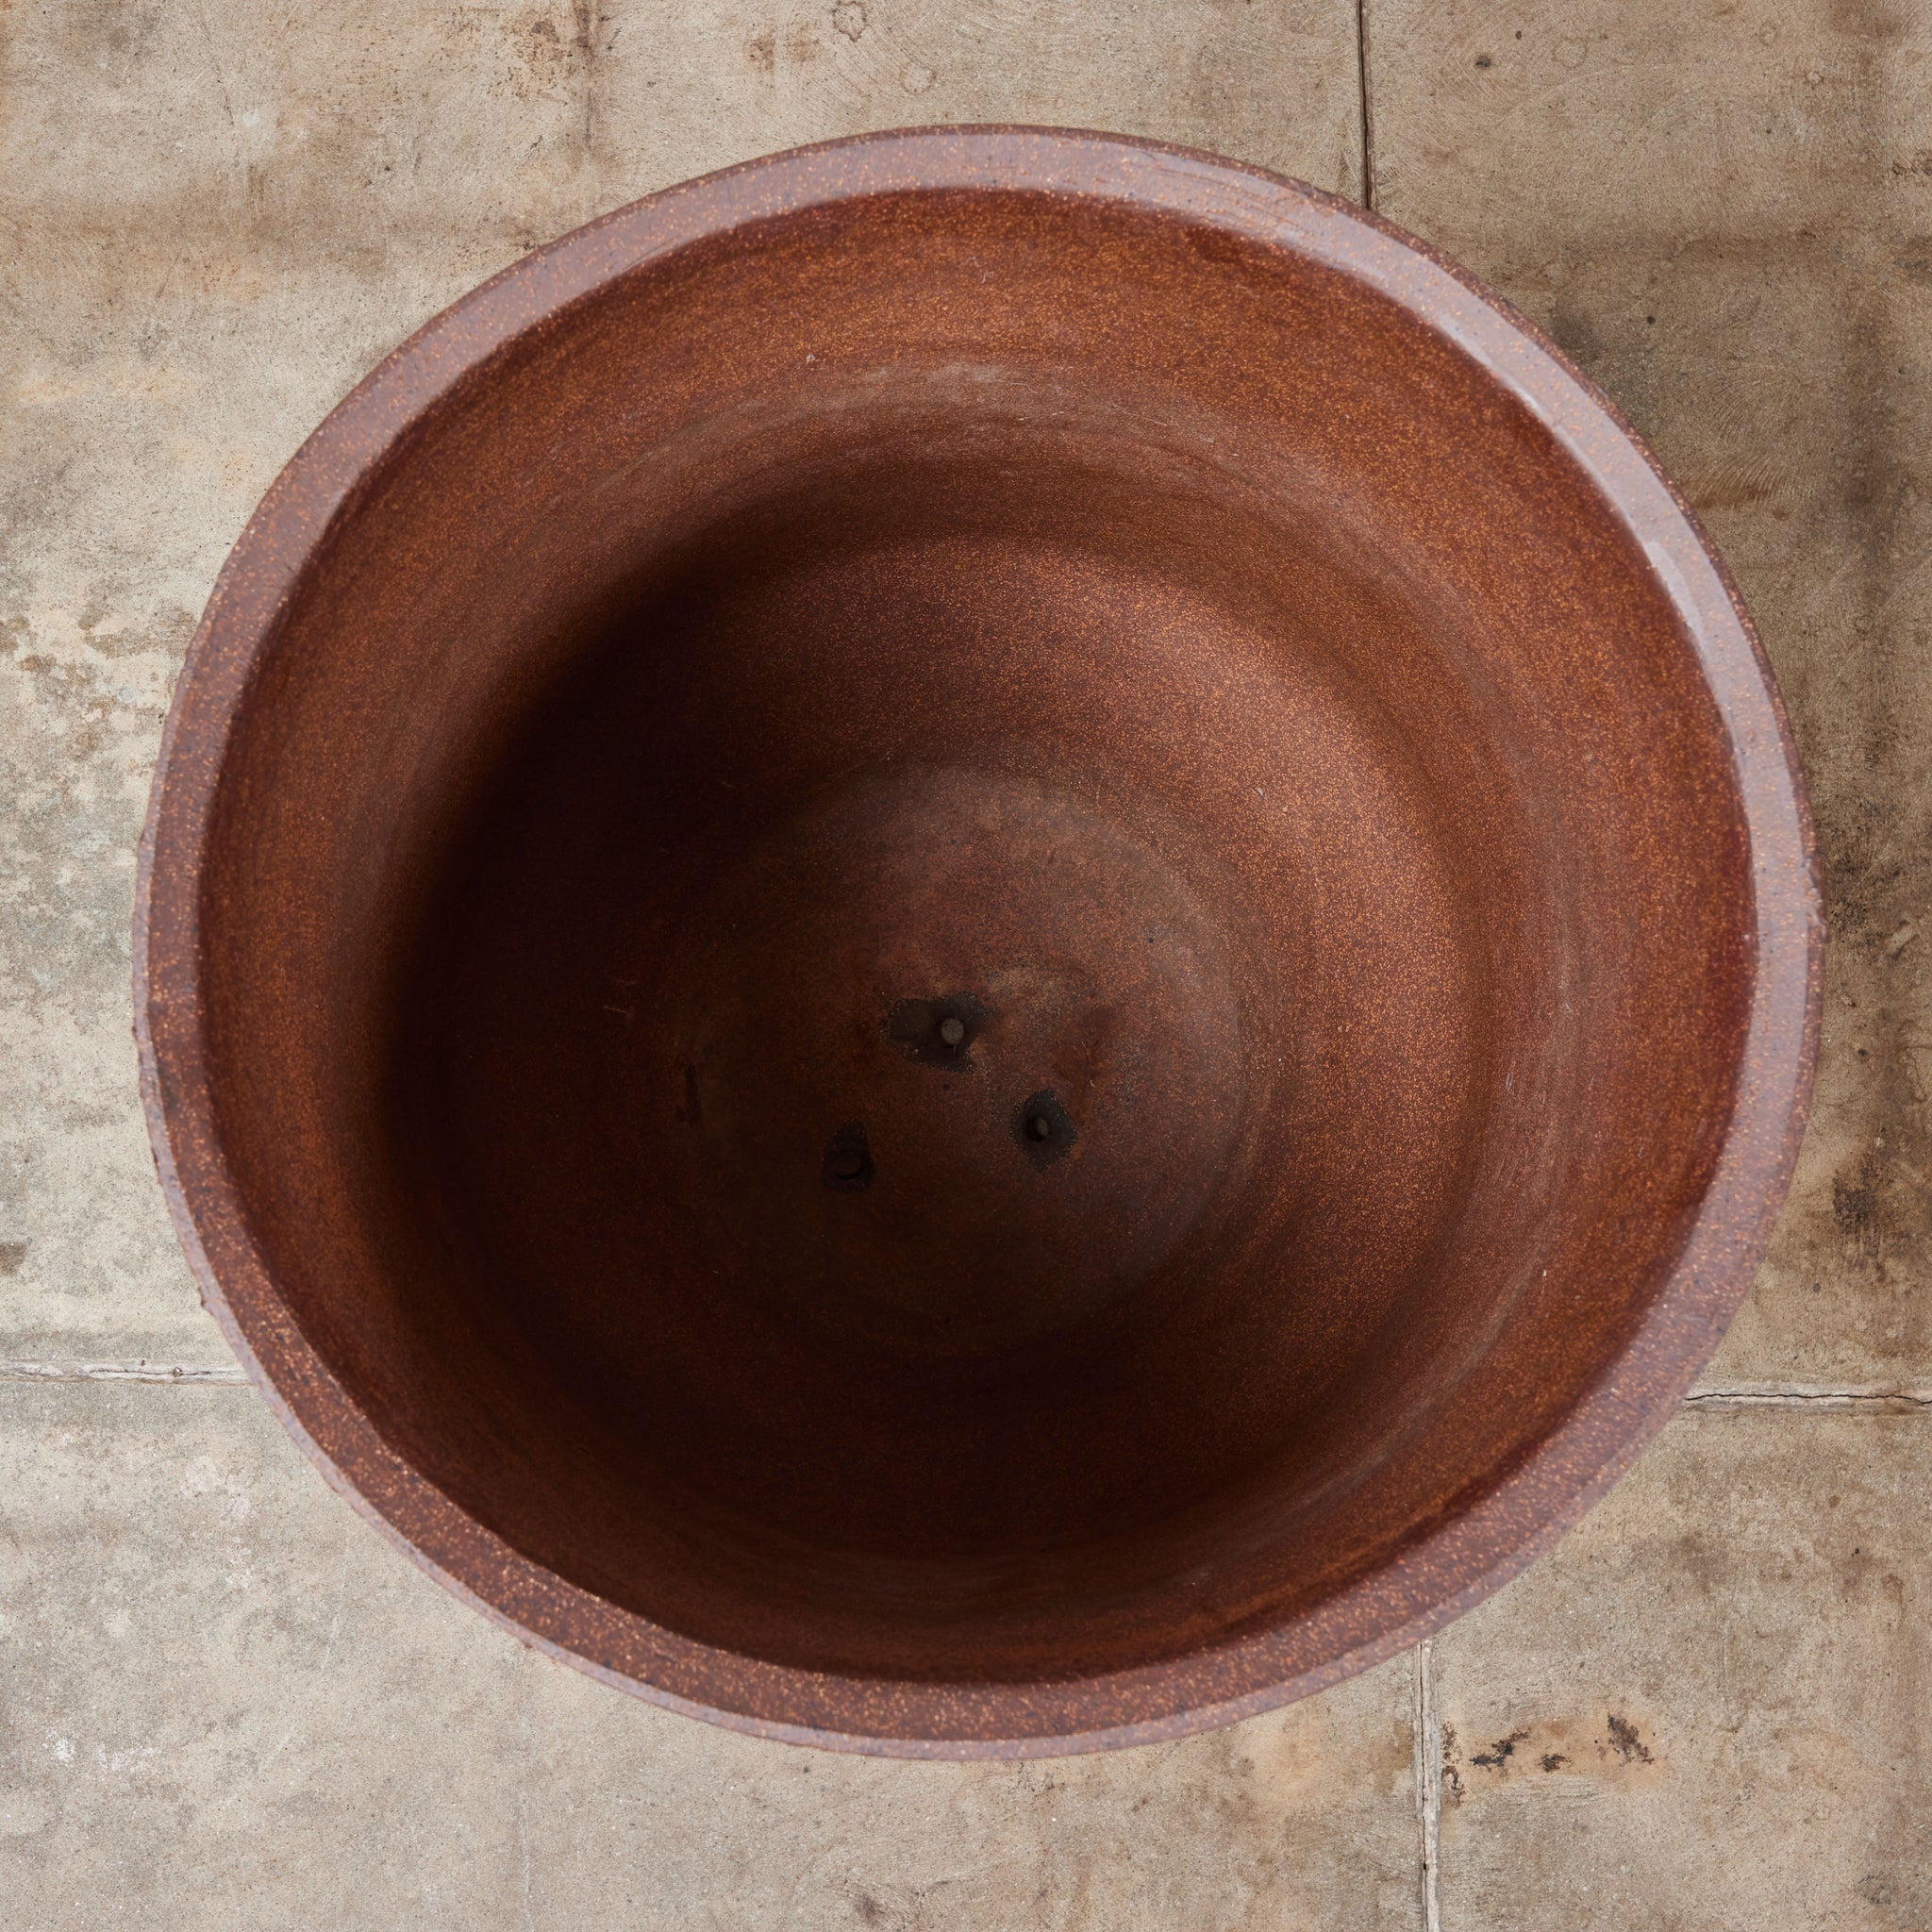 David Cressey Stoneware Pro/Artisan "Scratch" Bullet Planter for Architectural Pottery